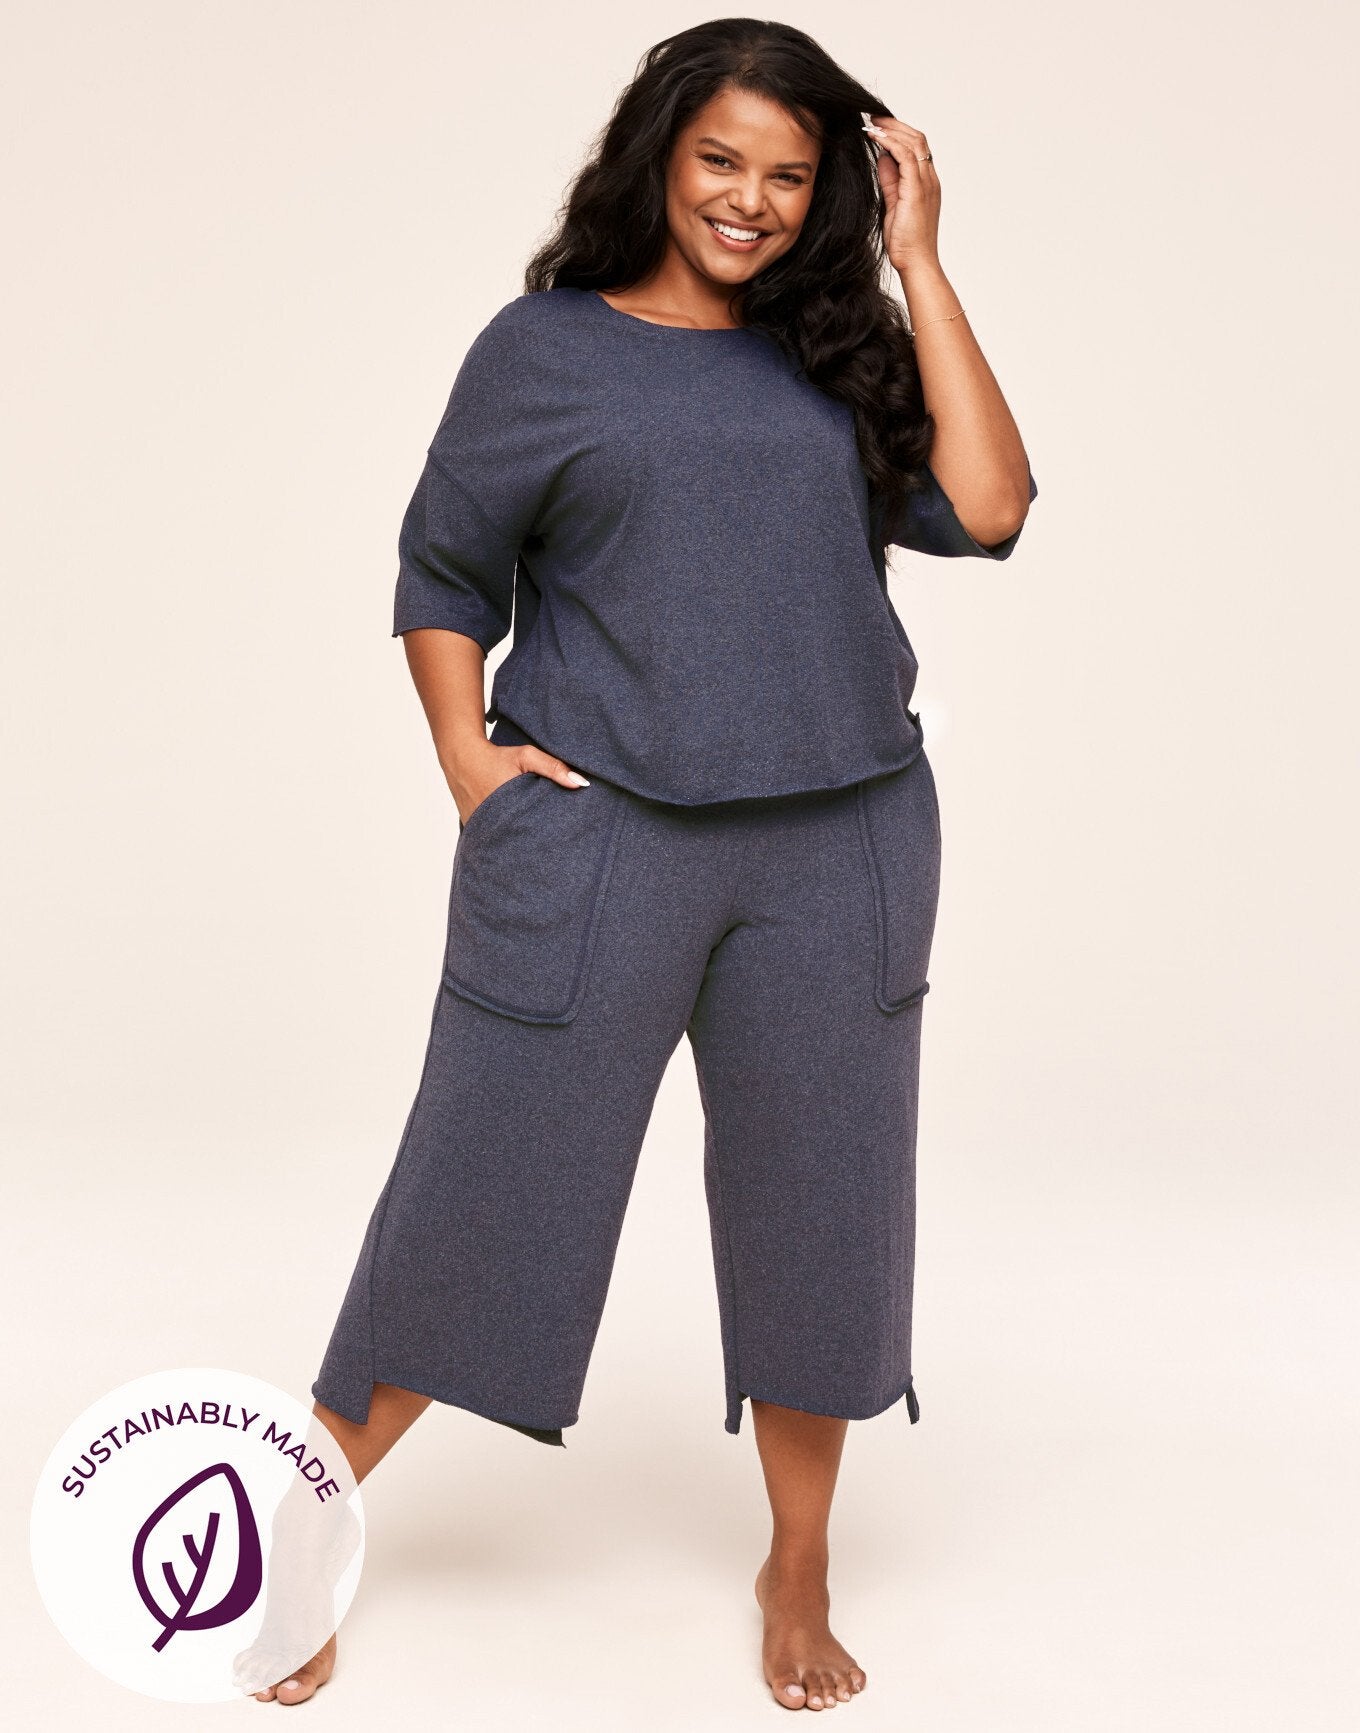 Adore Me Avery T-Shirt & Sweatpant Set in color Evening Blue and shape pj